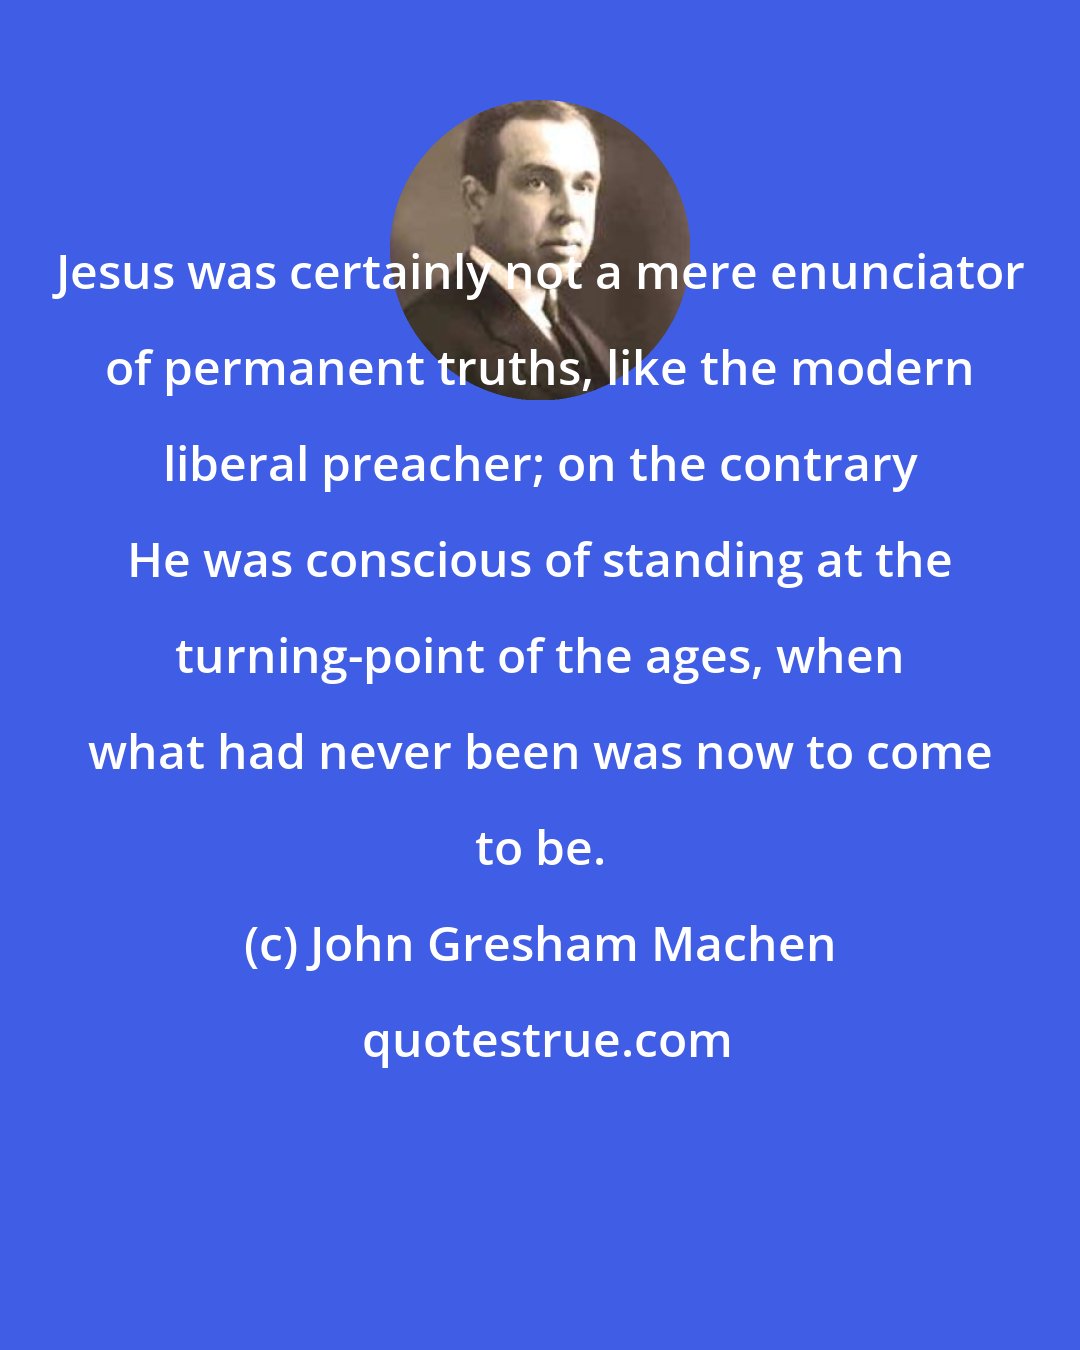 John Gresham Machen: Jesus was certainly not a mere enunciator of permanent truths, like the modern liberal preacher; on the contrary He was conscious of standing at the turning-point of the ages, when what had never been was now to come to be.